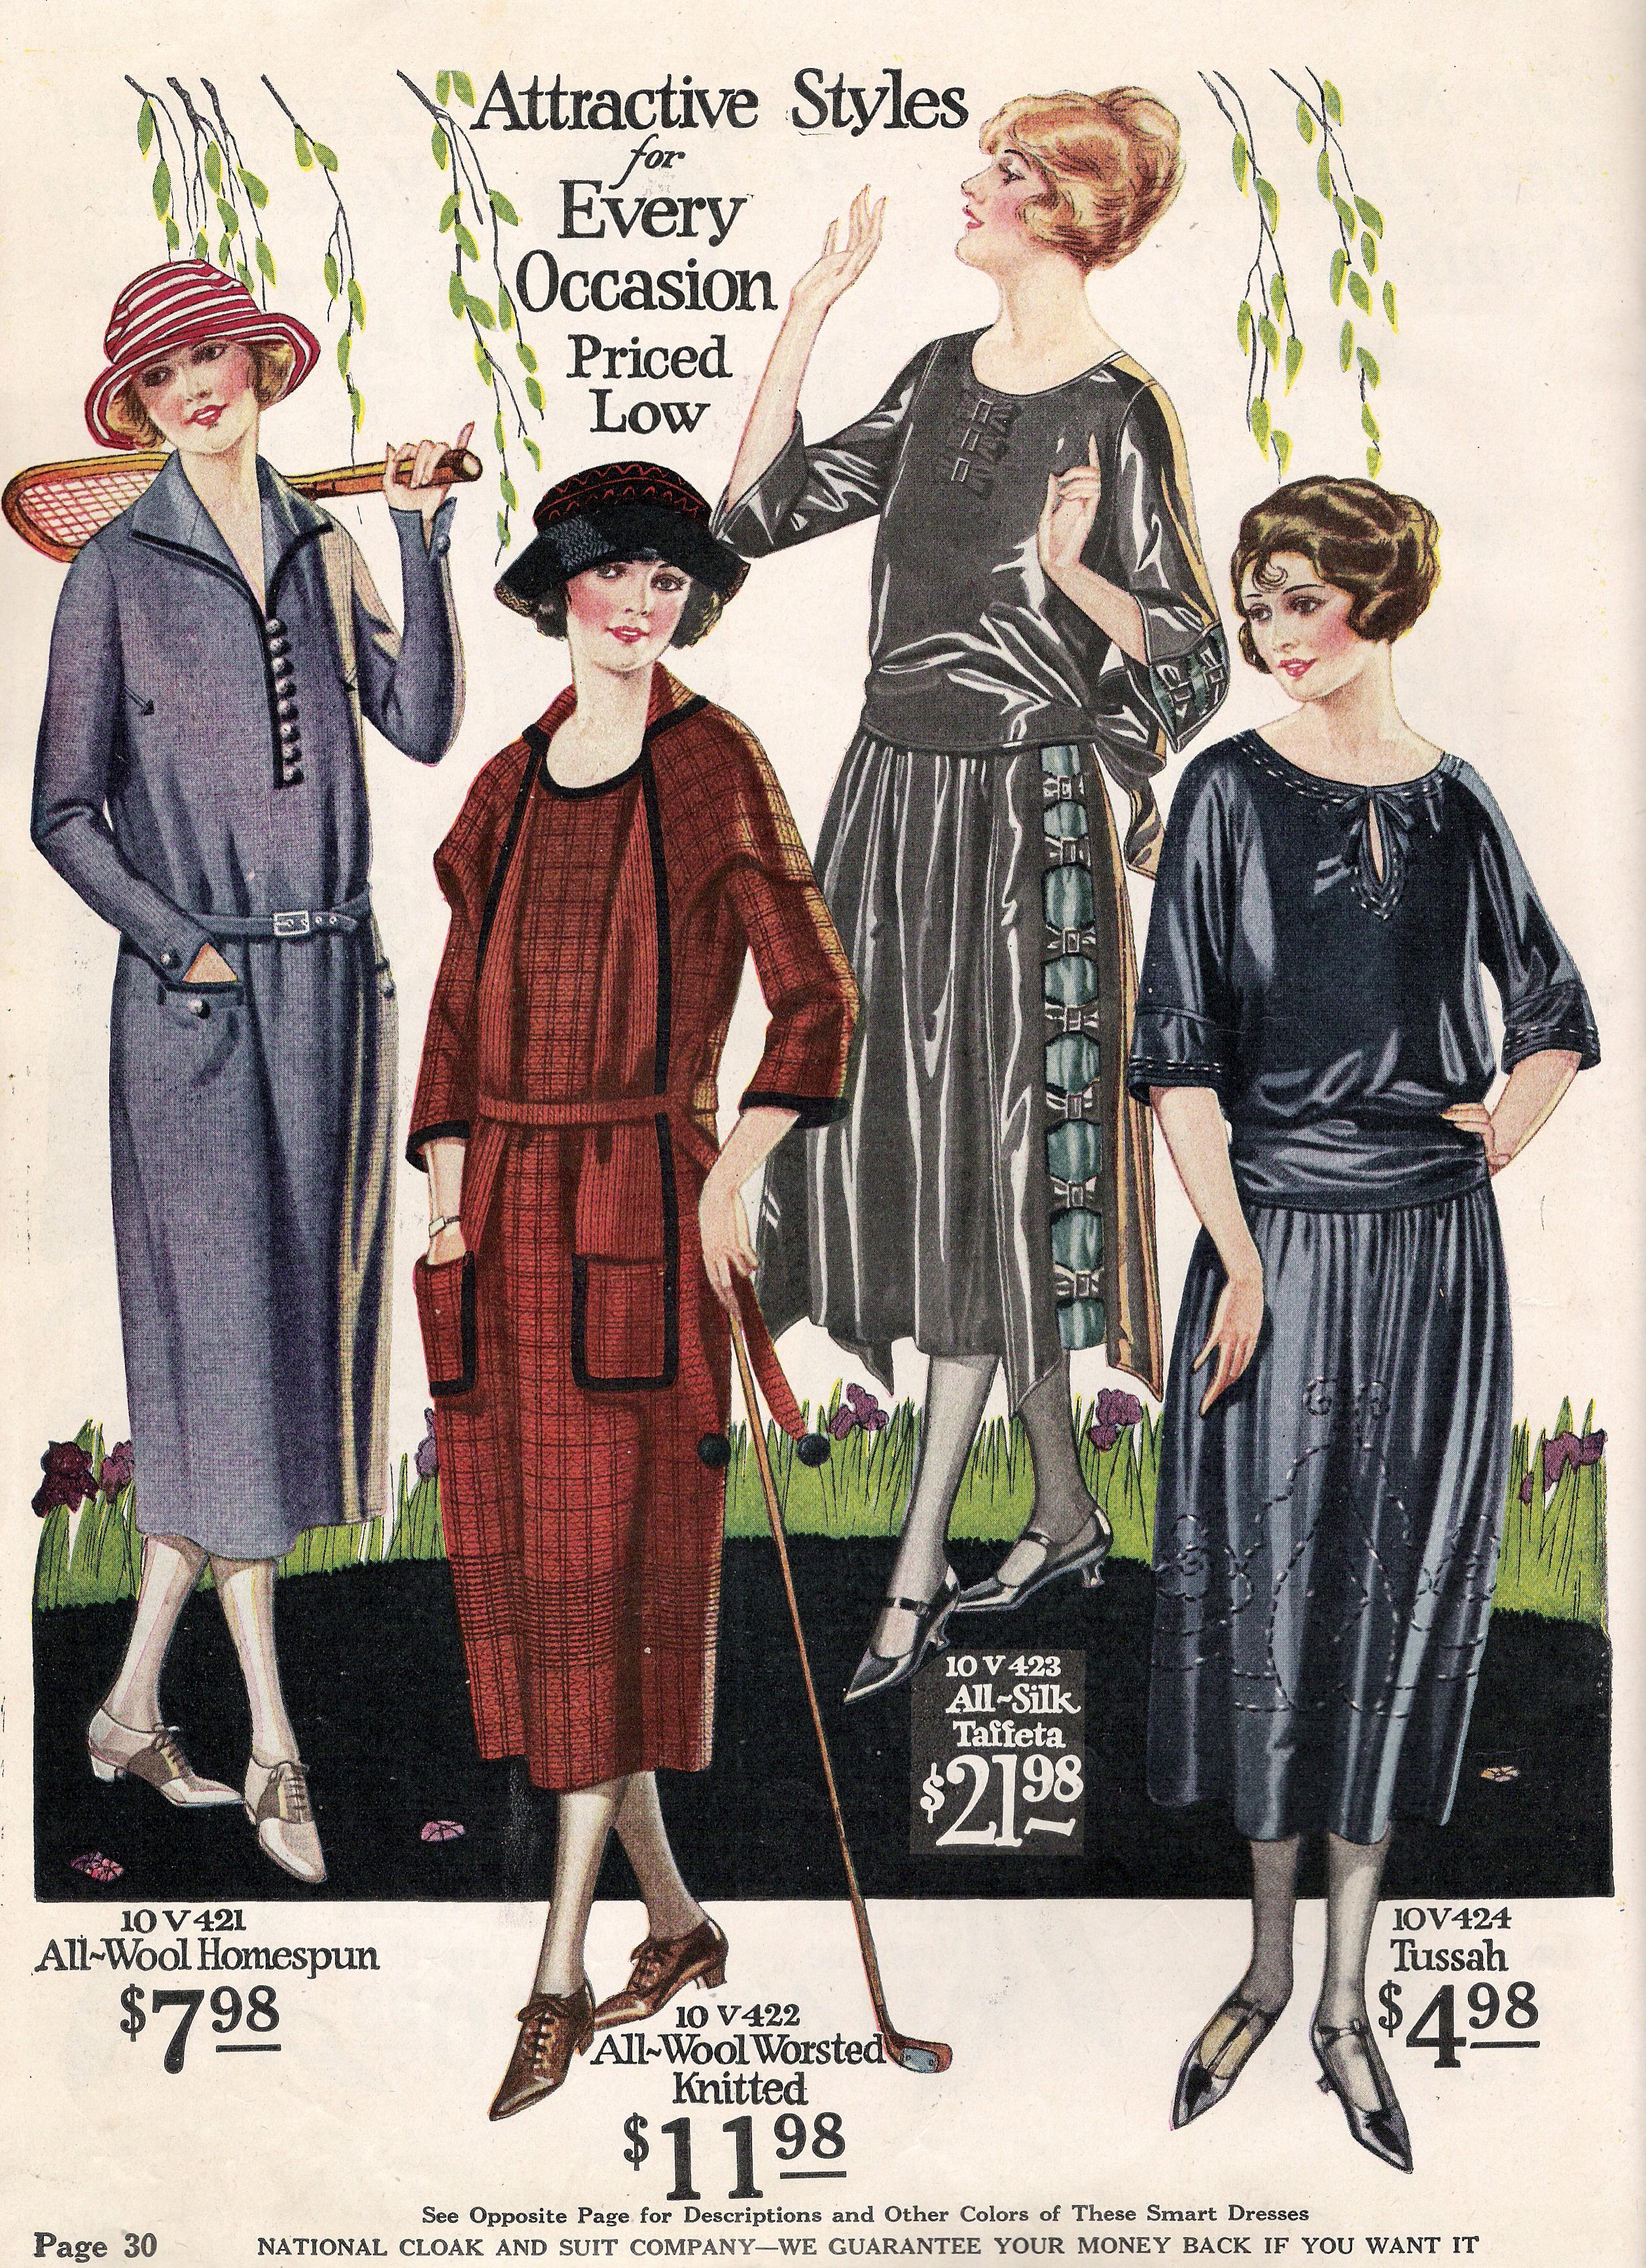 1920s Dress History, Daytime Dresses – Pictures of 20s Fashion